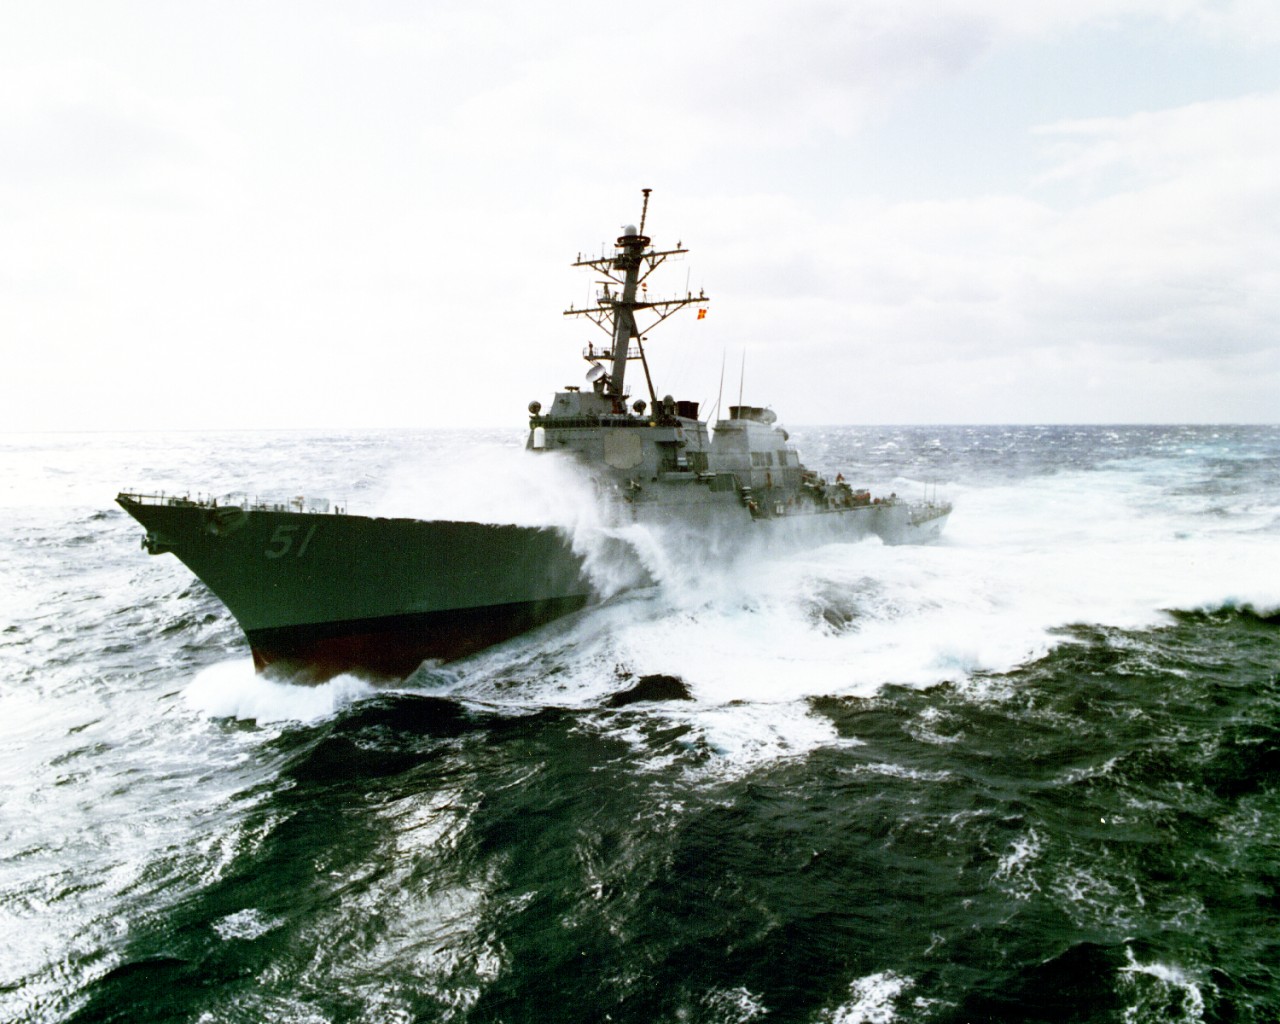 330-CFD-DN-SC-93-03708:   USS Arleigh Burke (DDG-51), 1993.   Port bow view of the guided-missile destroyer underway in rough seas in the Atlantic Ocean, March 31, 1993.  Photographed by PH3 James Collins.  Official U.S. Navy Photograph, now in the collections of the National Archives.